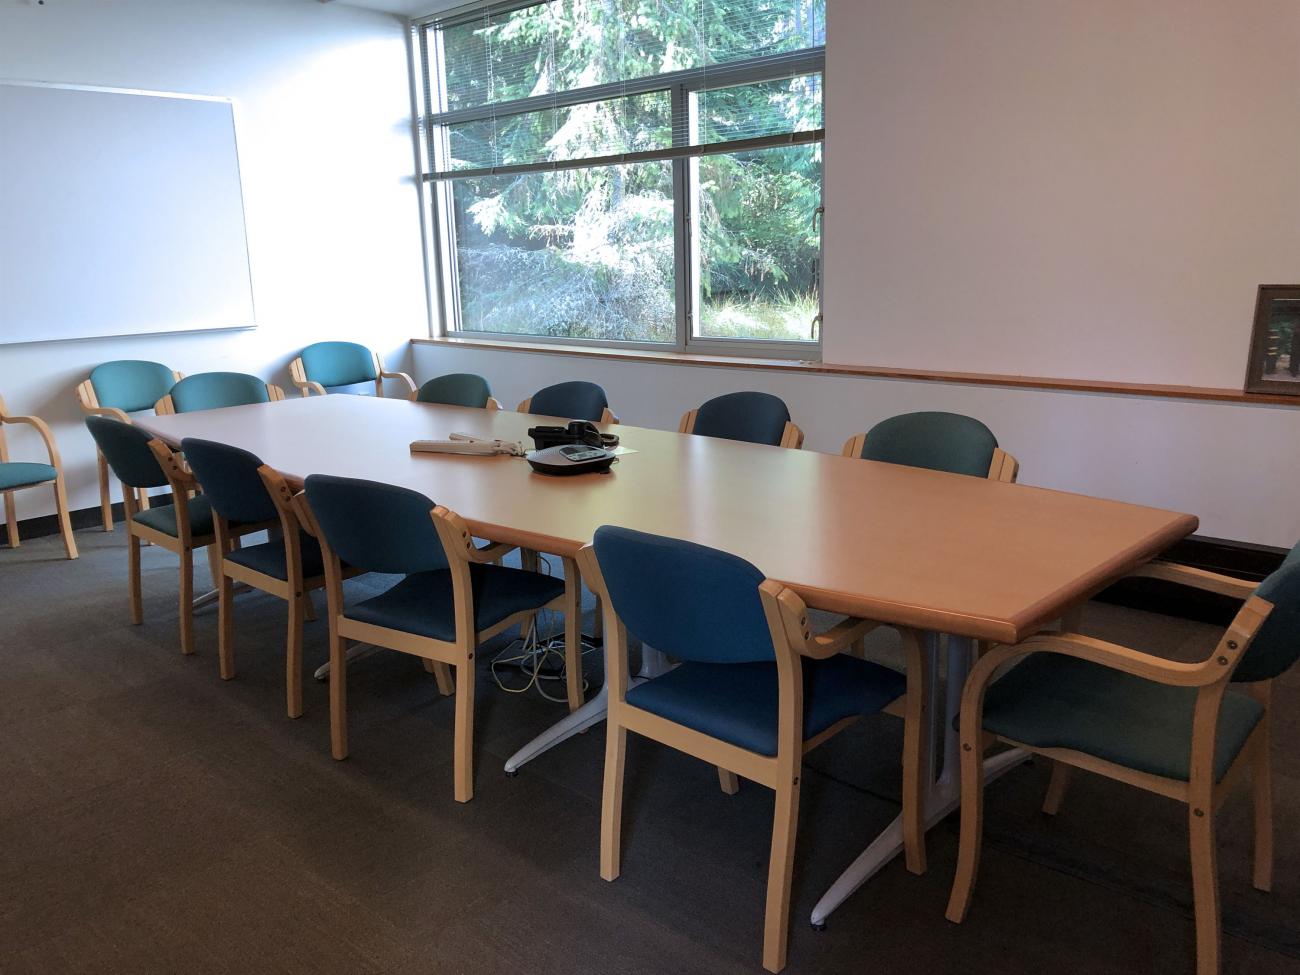 A smaller room with ten chairs located around a conference table.